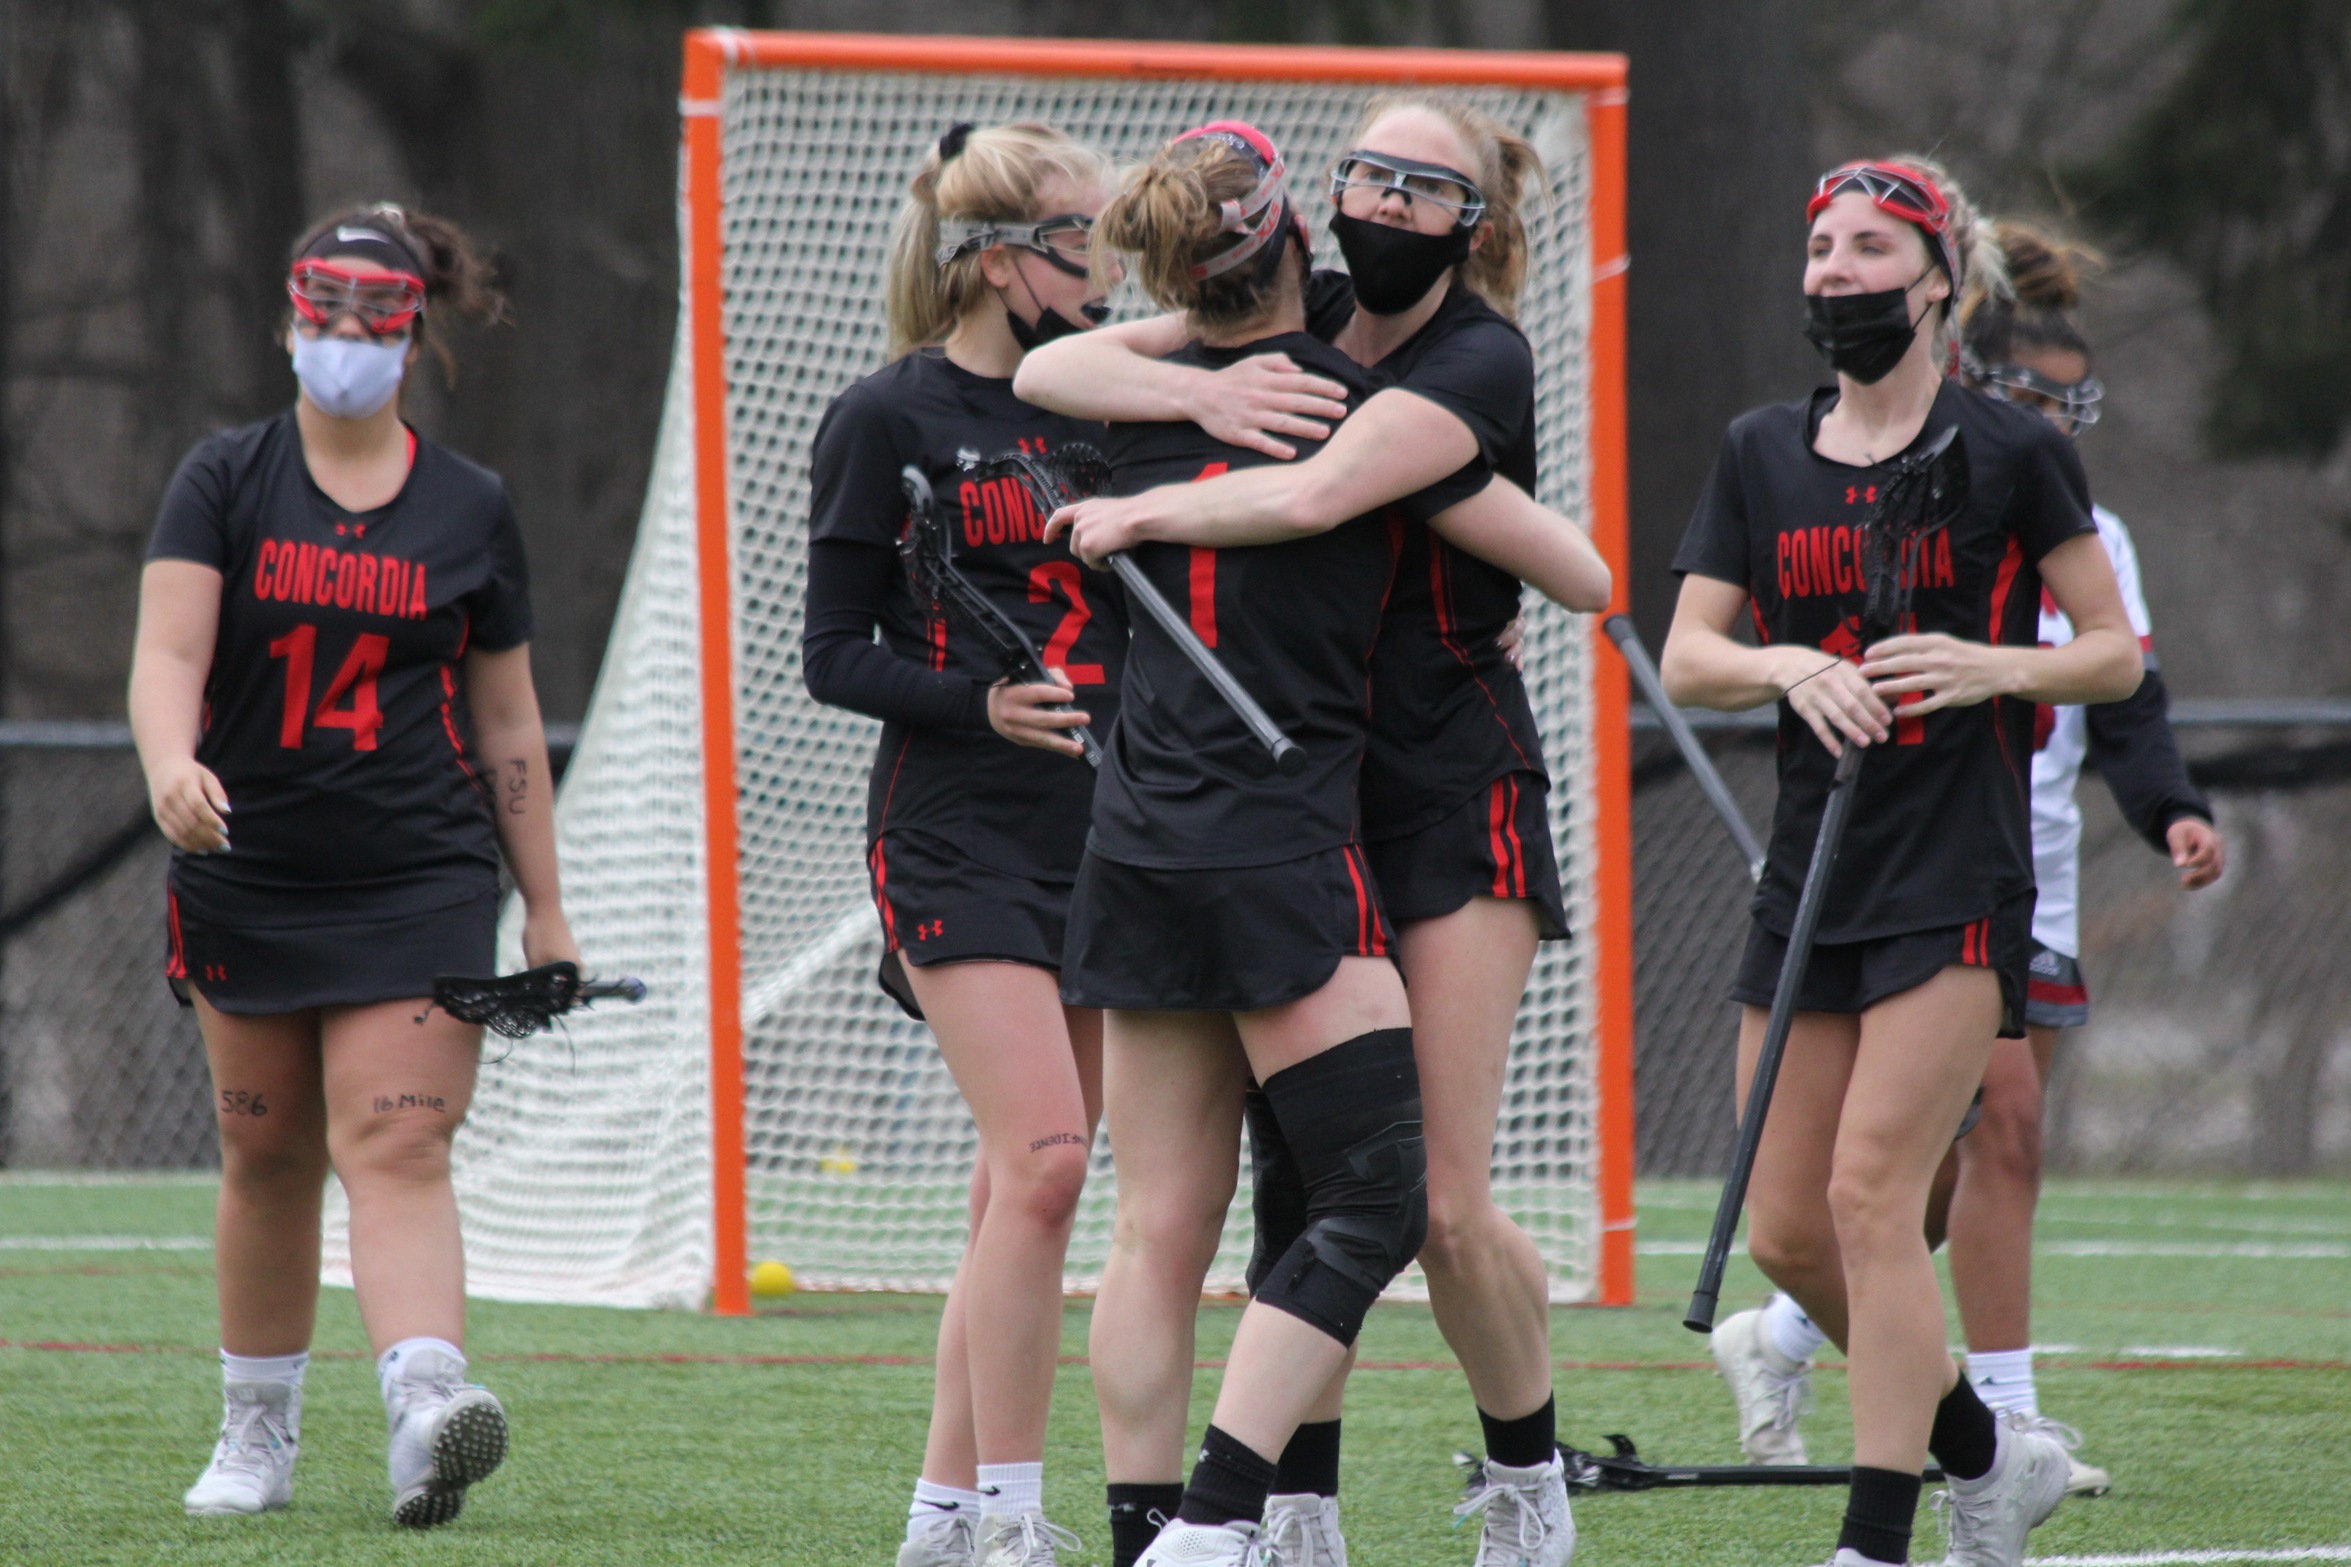 SEASON PREVIEW: Women's Lacrosse Looks to Make Another WHAC Run